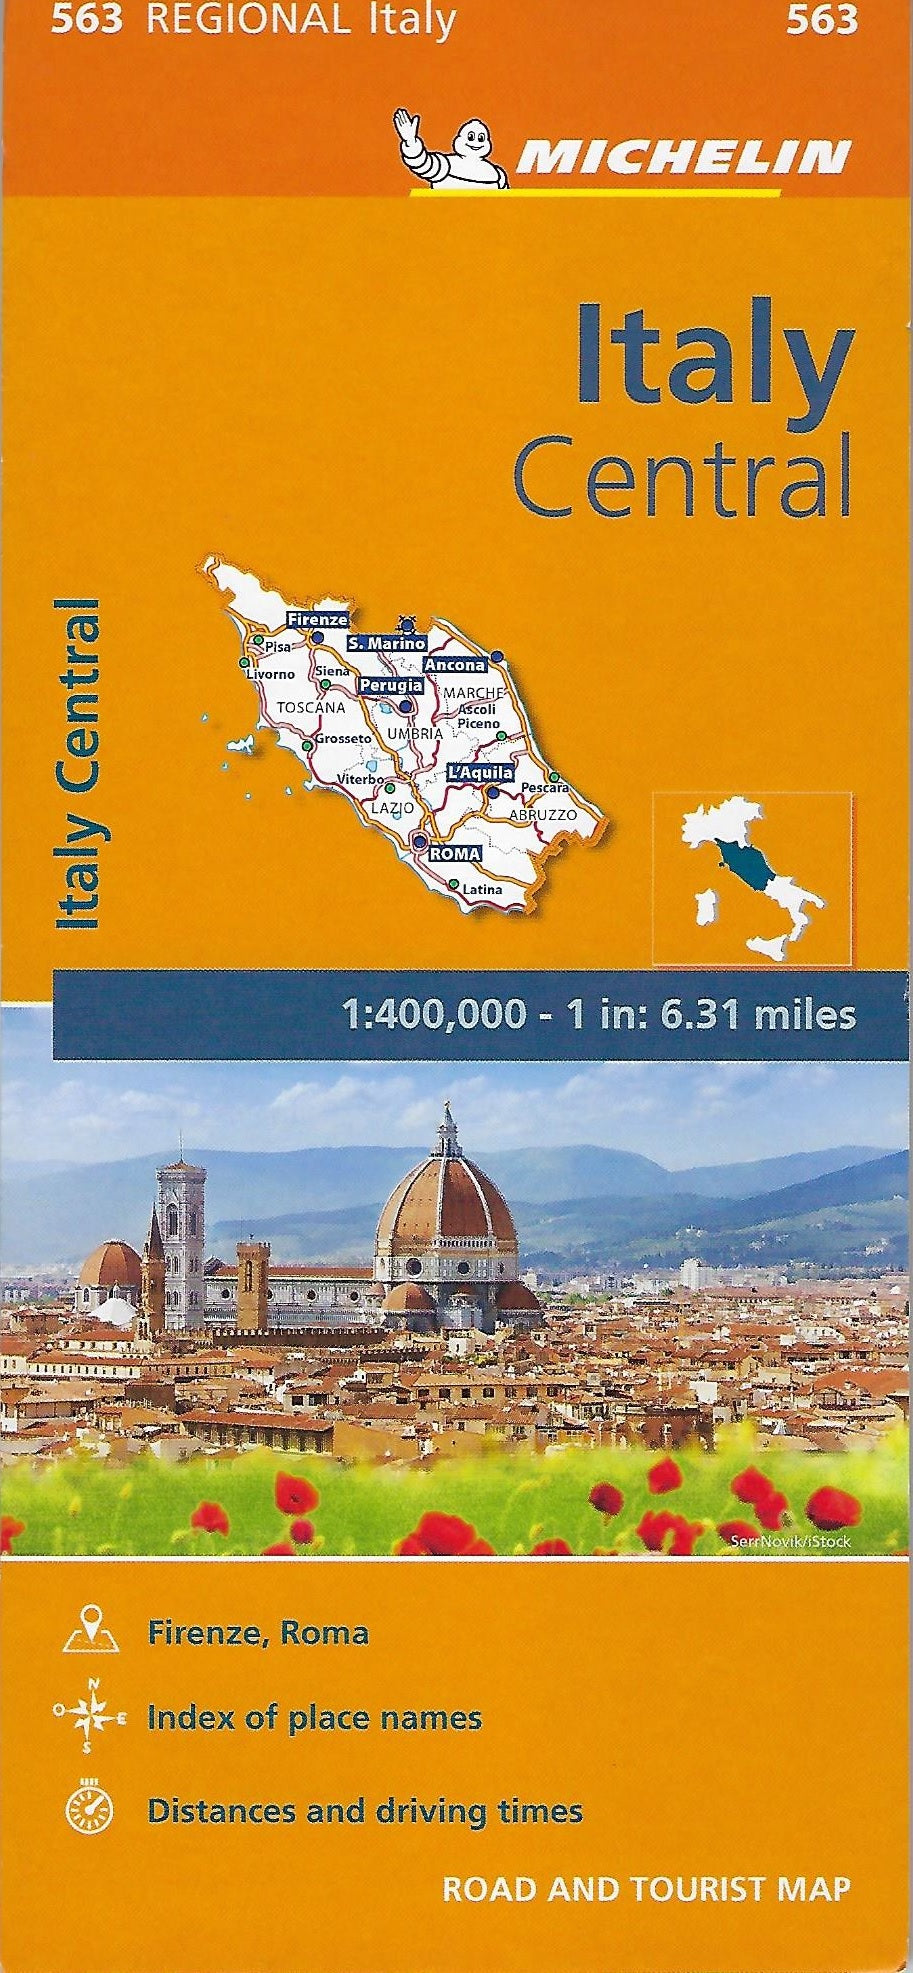 Italy Central Michelin Map 563